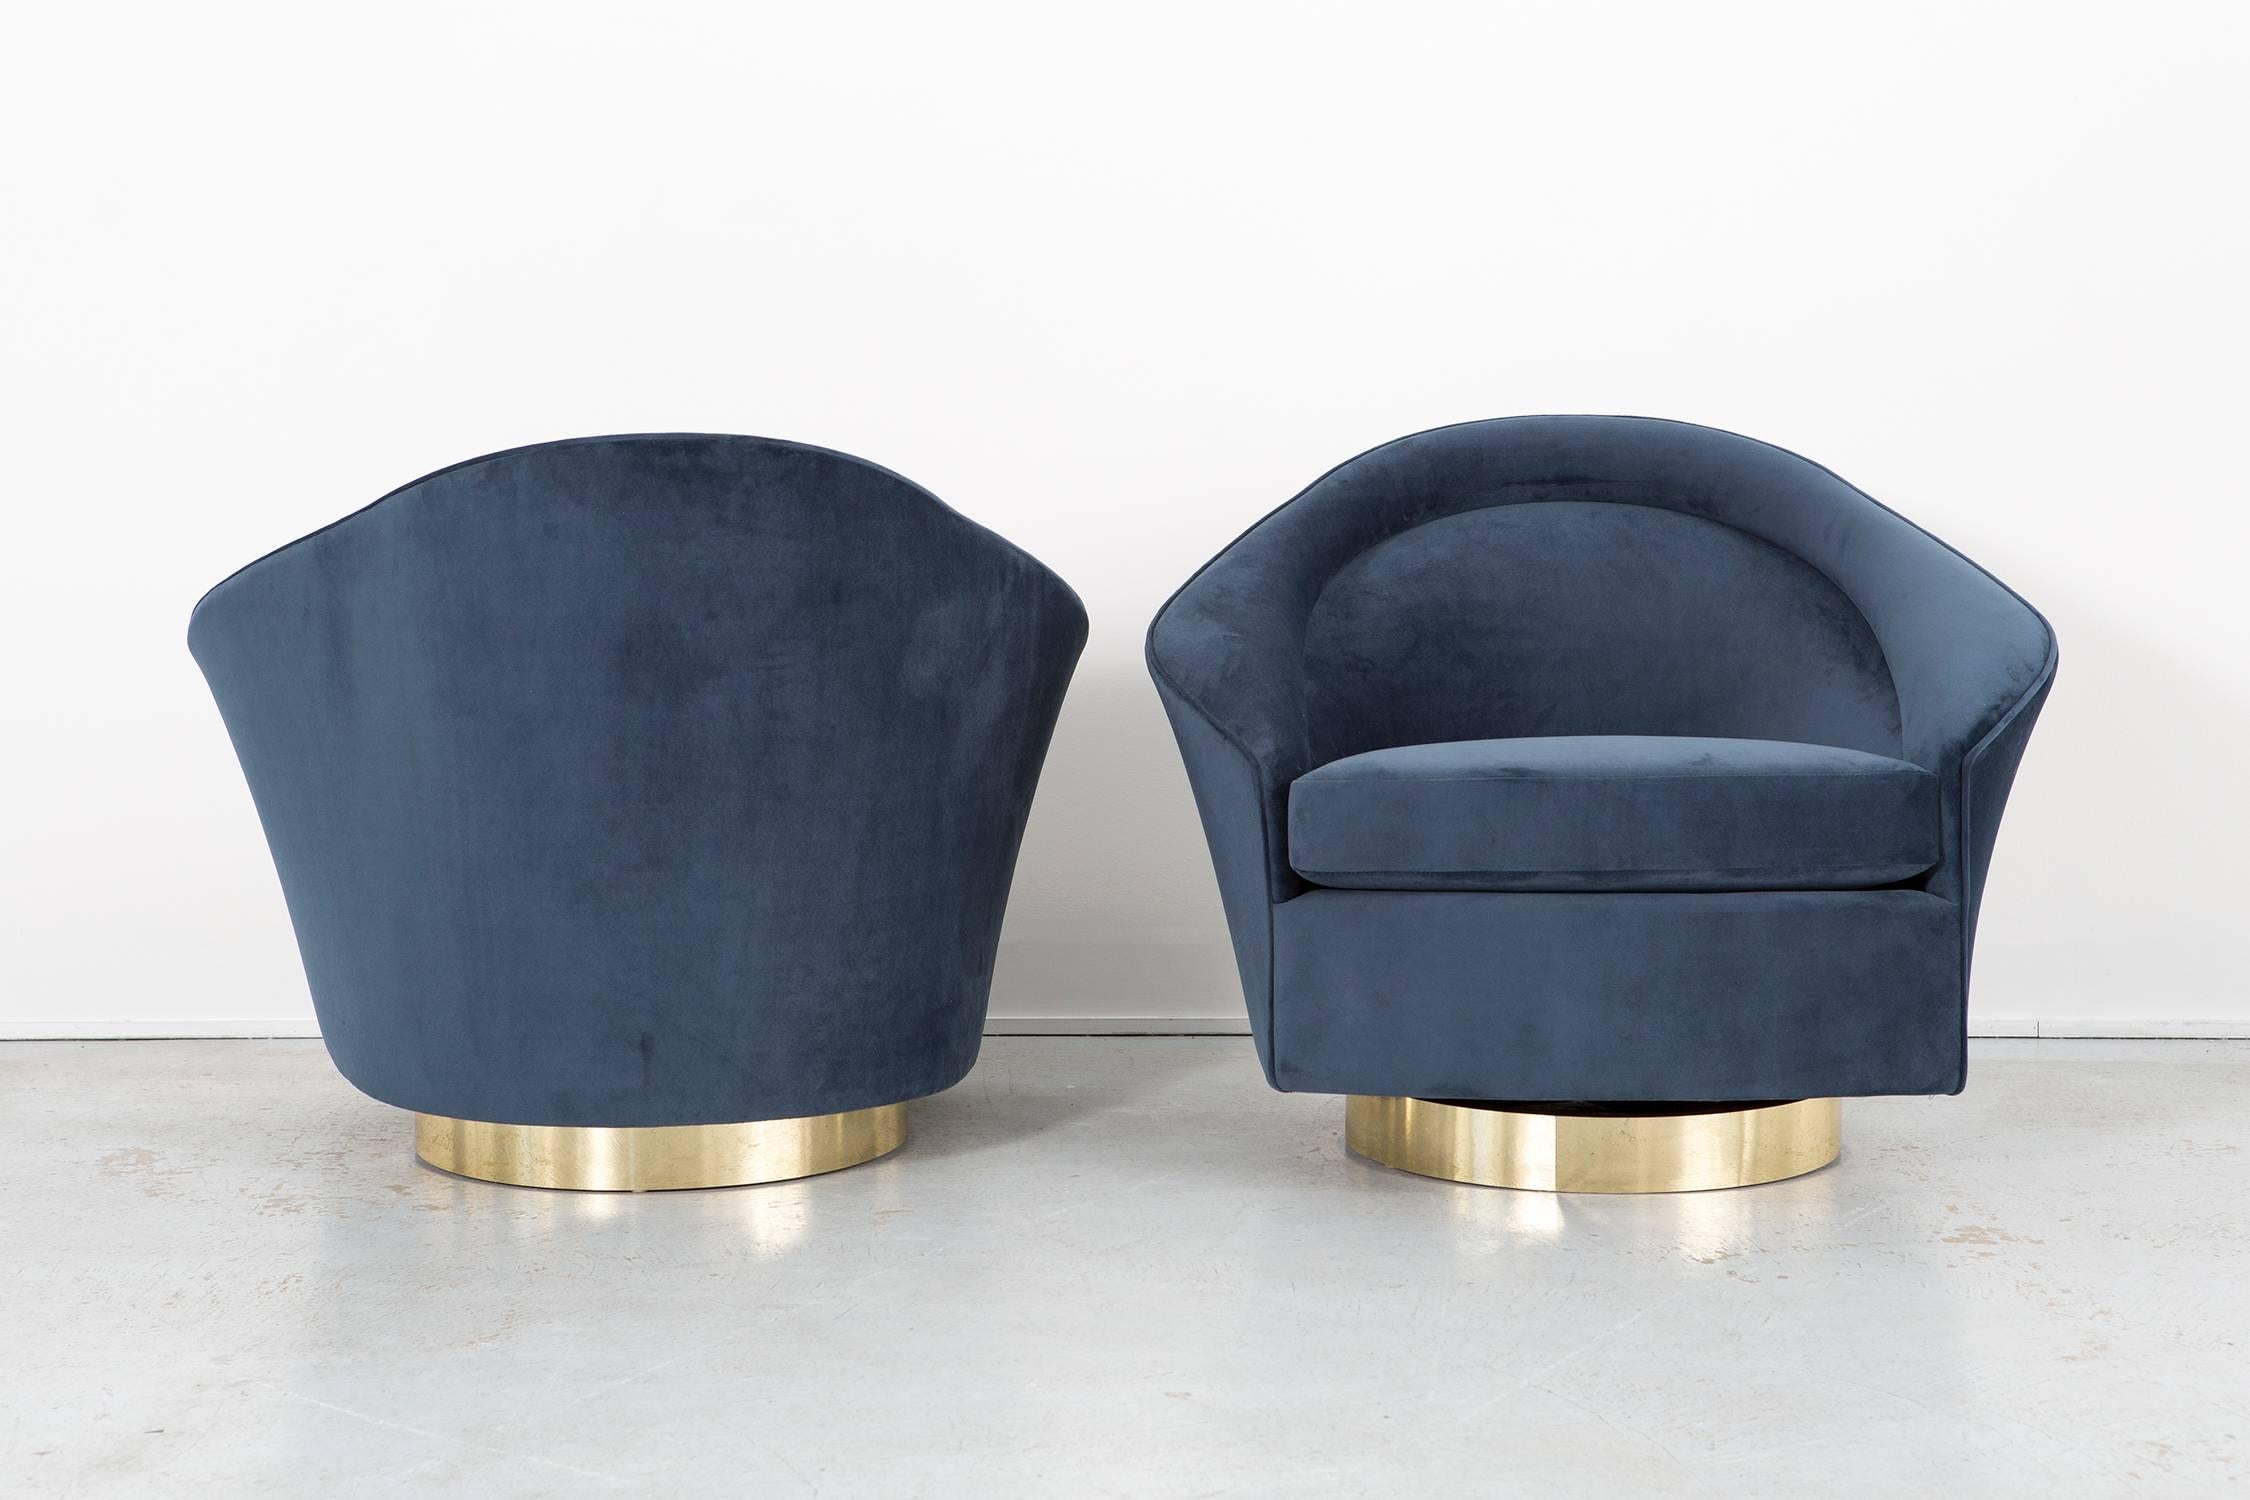 Set of swivel lounge chairs

designed by Adrian Pearsall for Craft Associates

circa 1960s, USA

reupholstered brushed velvet + brass bases

Measures: 29 9/16” H x 36 ” W x 28” D x seat 21” H.